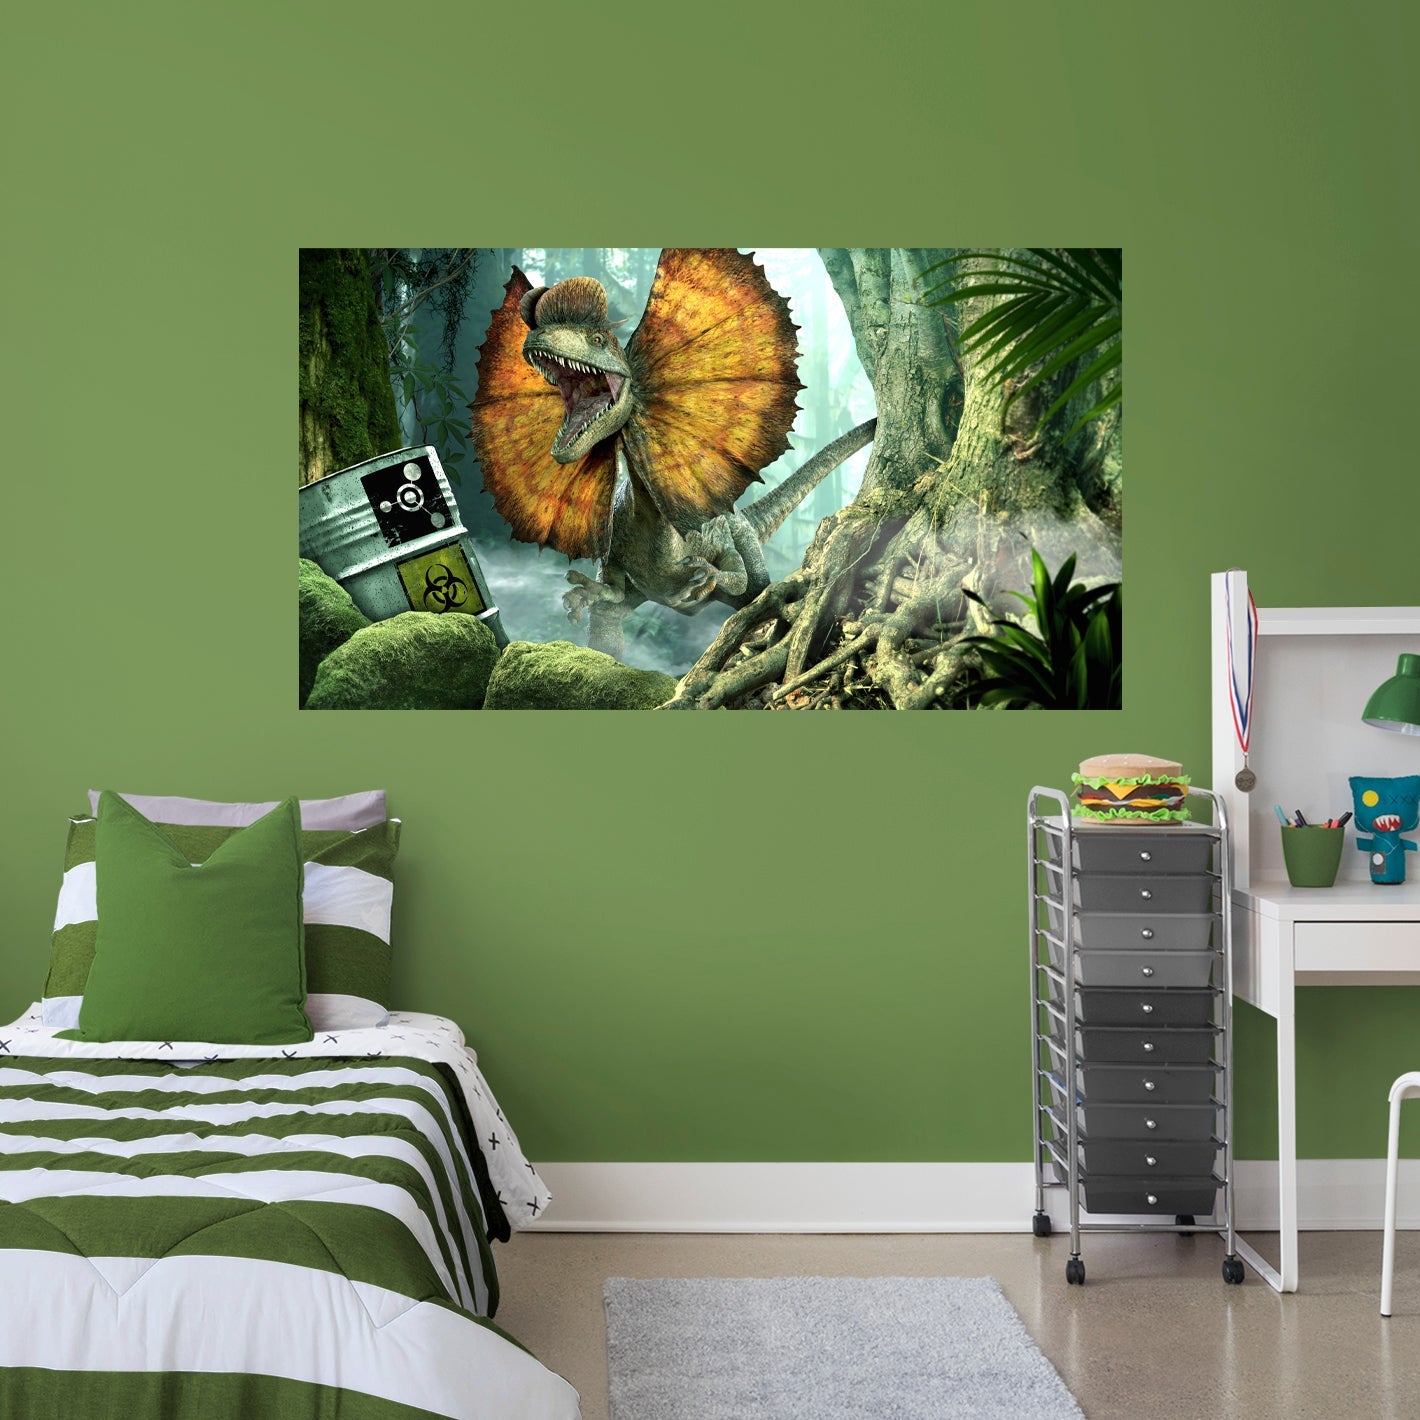 Jurassic World Dominion: Dilophosaurus Biosyn Forest Barrel Poster - Officially Licensed NBC Universal Removable Adhesive Decal